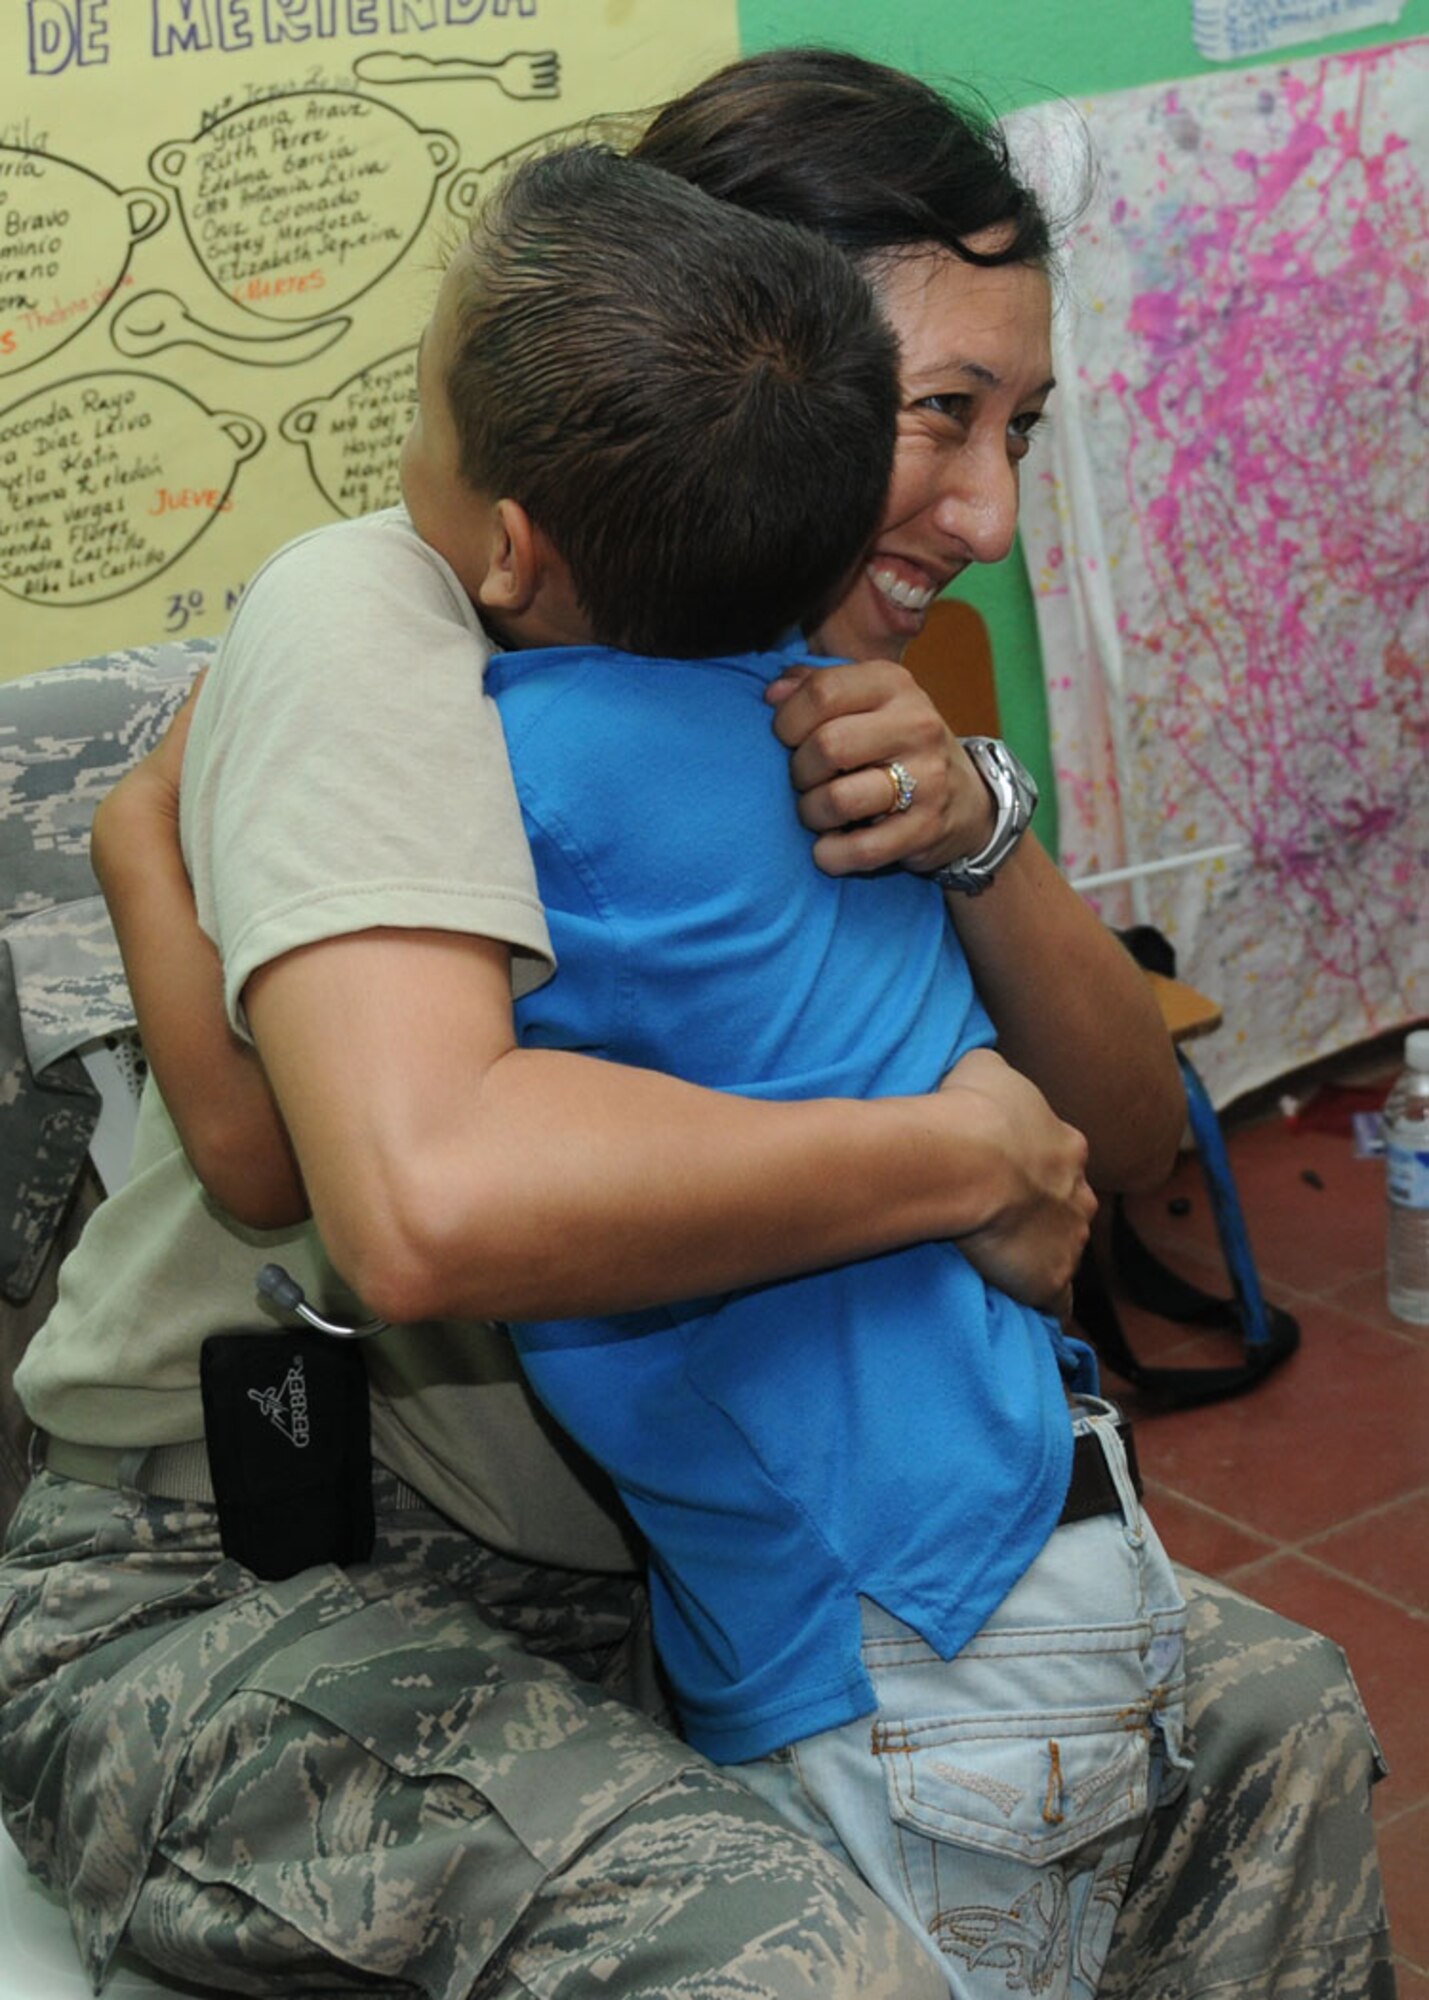 Master Sgt. Kamille Resetz, a health services technician with the 916th Aerospace Medicine Squadron in North Carolina, receives a hug from a very satisfied patient here Aug. 8, 2011. The unit spent two weeks in Central America on a humanitarian mission called a Medical Readiness Training Exercise, called a MEDRETE. (USAF photo by Senior Airman Meredith A. H. Thomas, 916 ARW/PA)